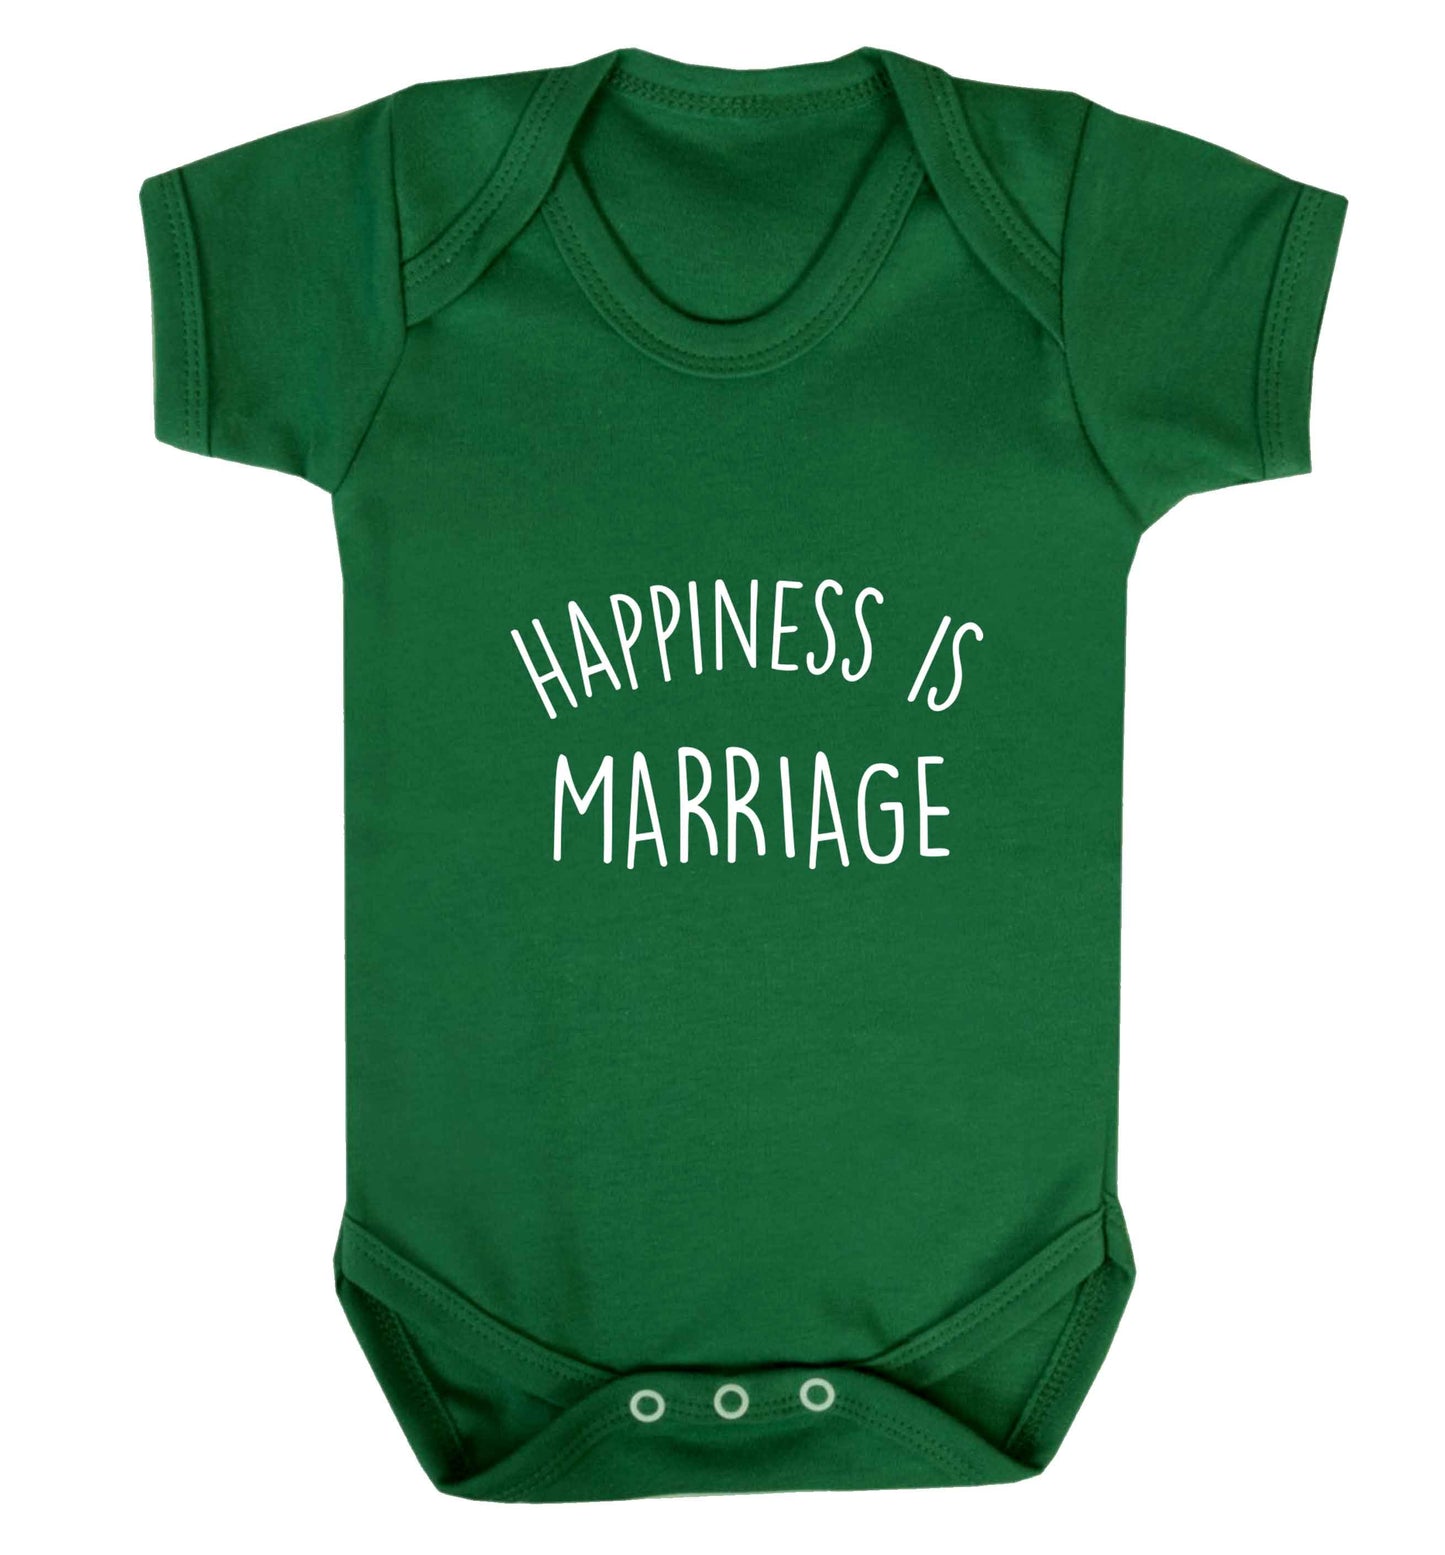 Happiness is wedding planning baby vest green 18-24 months